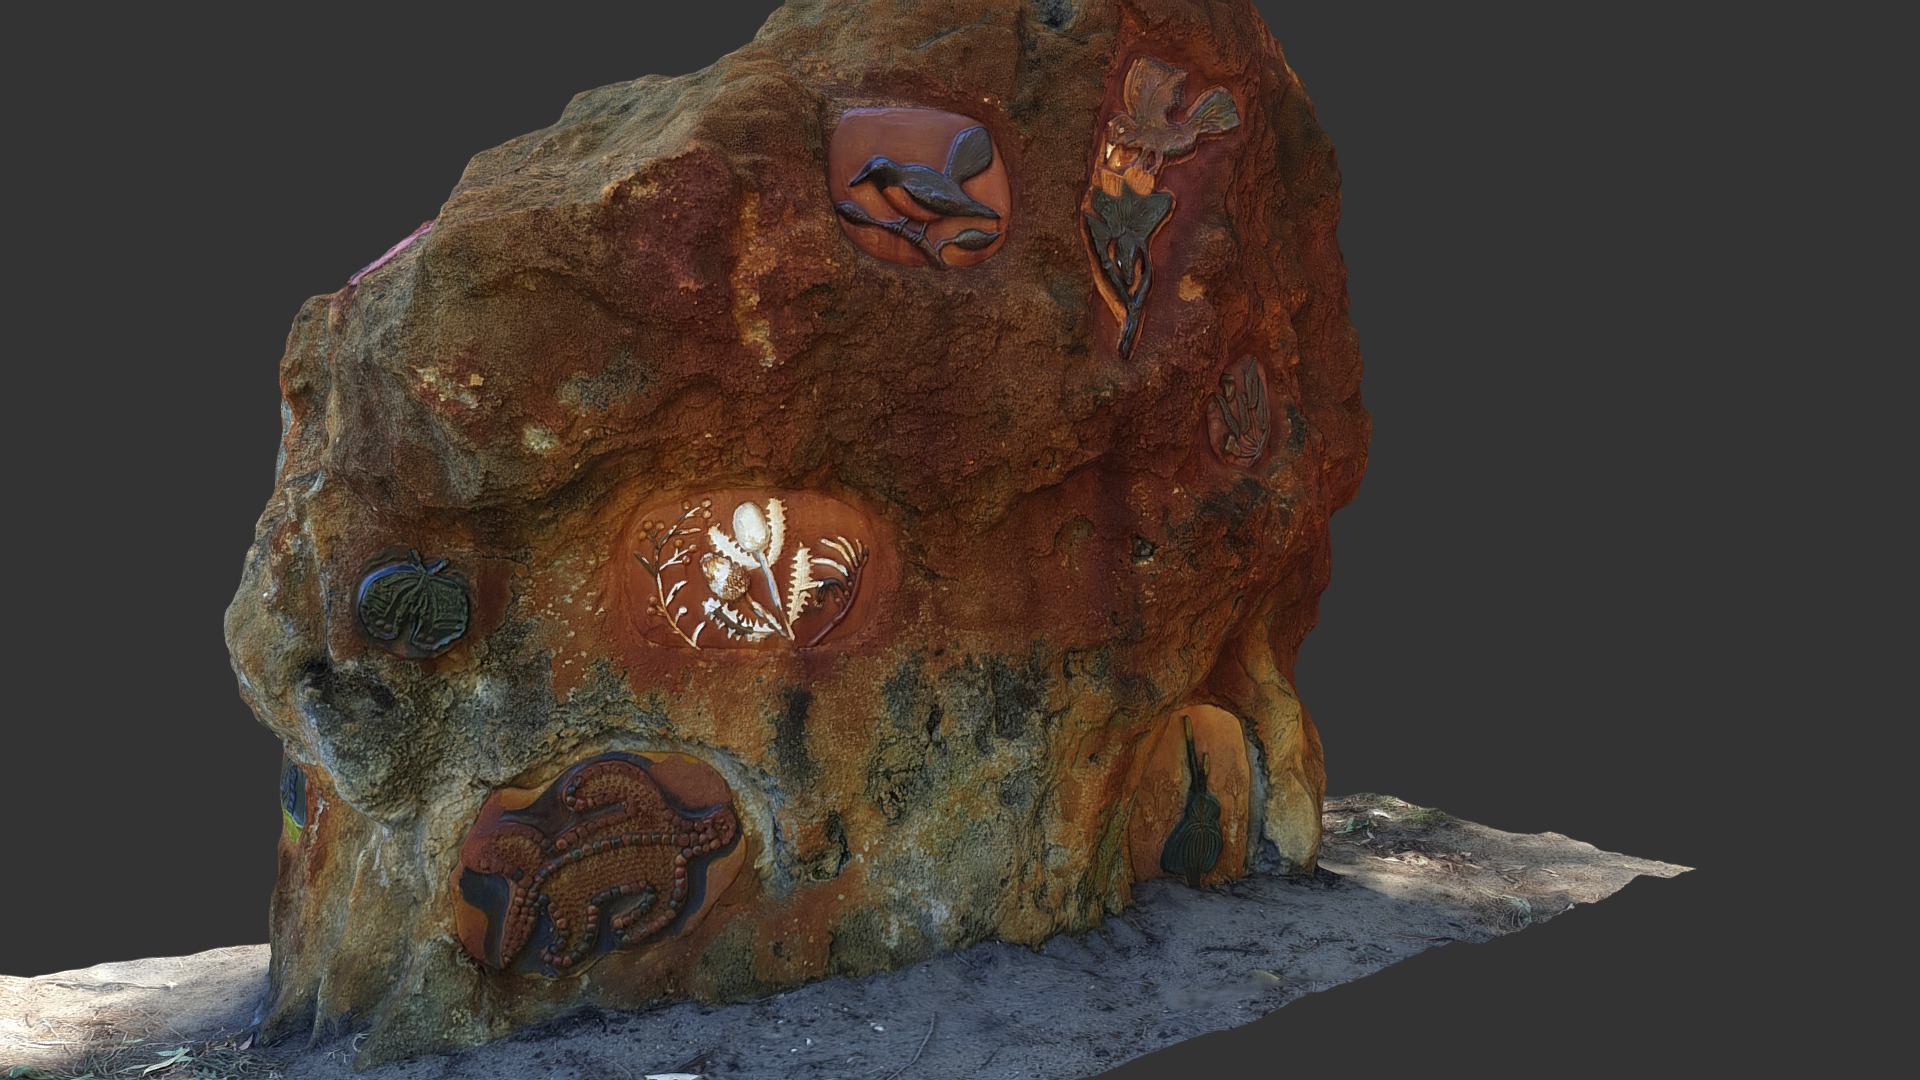 3D model Rock sculpture - This is a 3D model of the Rock sculpture. The 3D model is about a large rock with a face carved into it.